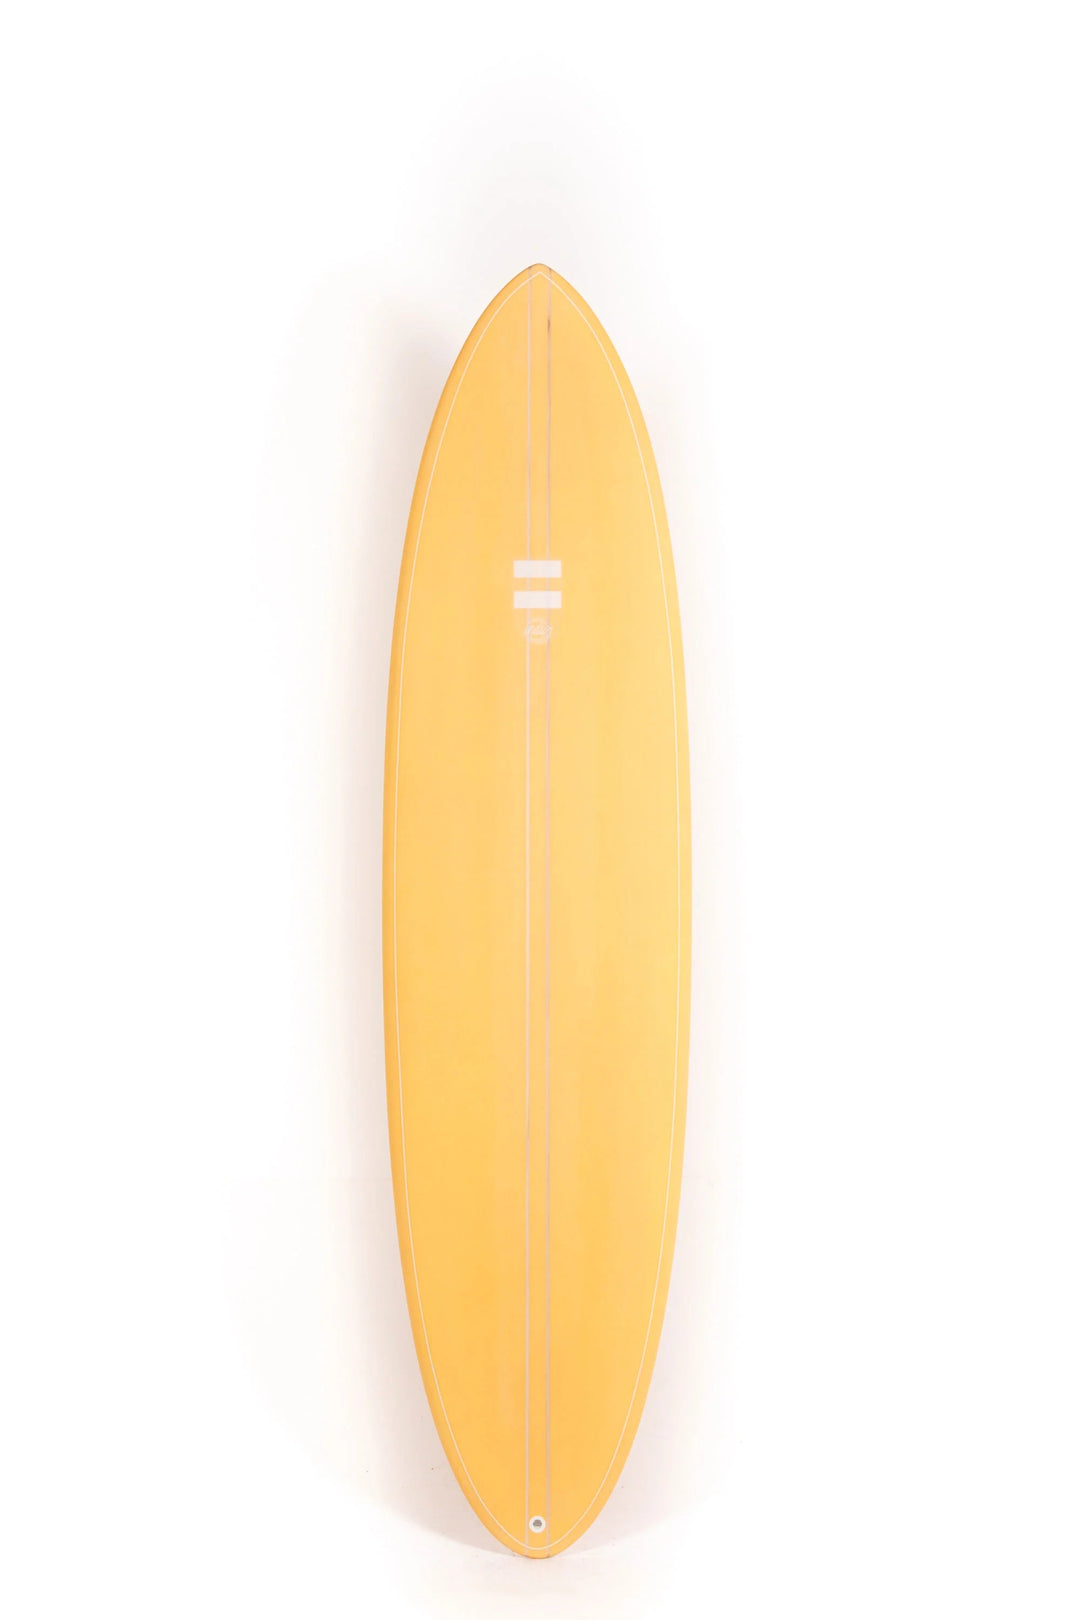 Indio Surfboards The Egg 6'8" - Toasted